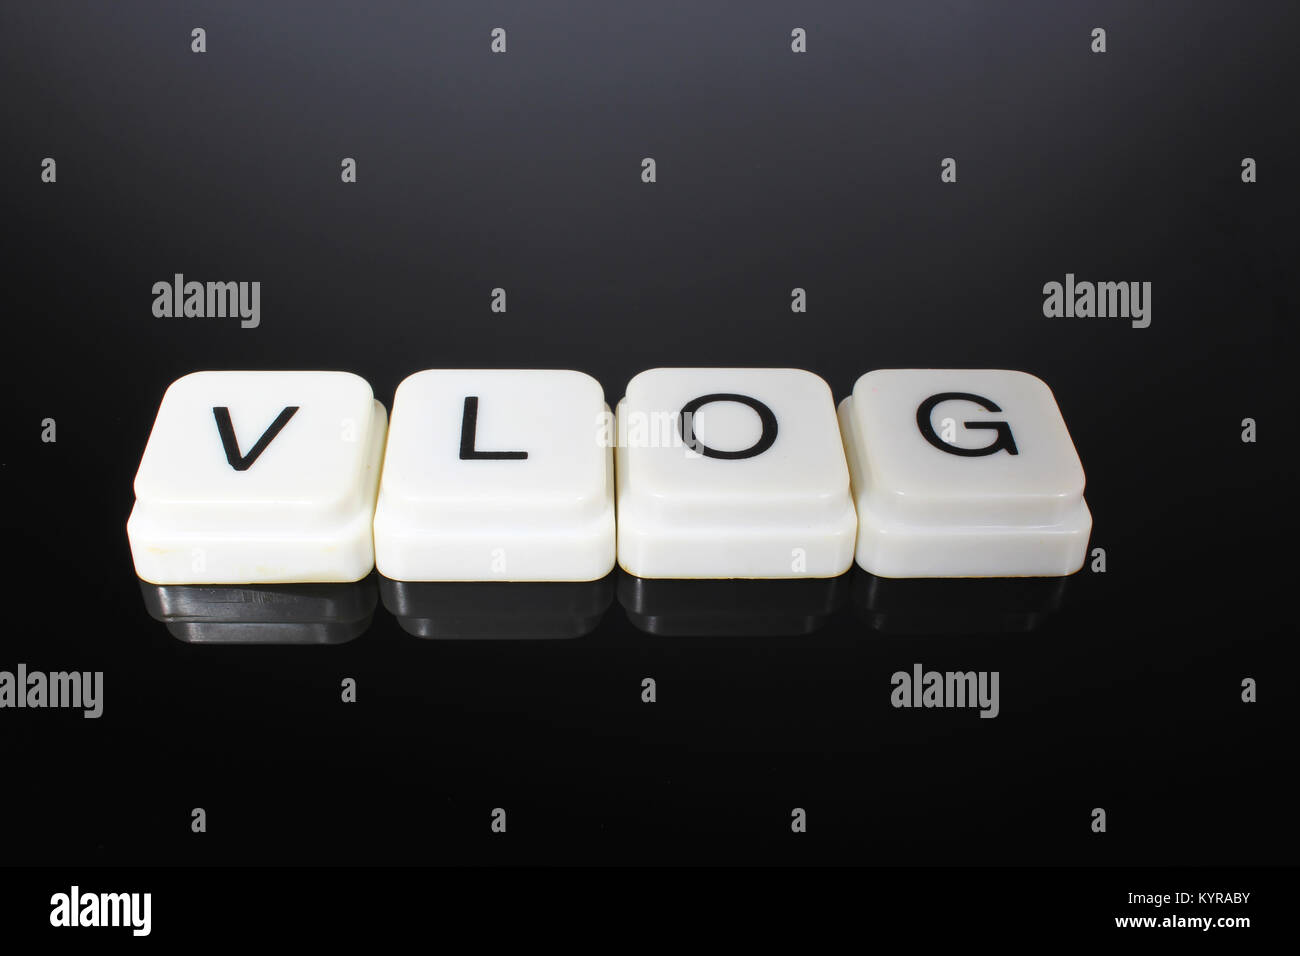 Vlog text word title caption label cover backdrop background. Alphabet letter toy blocks on black reflective background. White alphabetical letters. White educational toy block with words on mirror table. Stock Photo